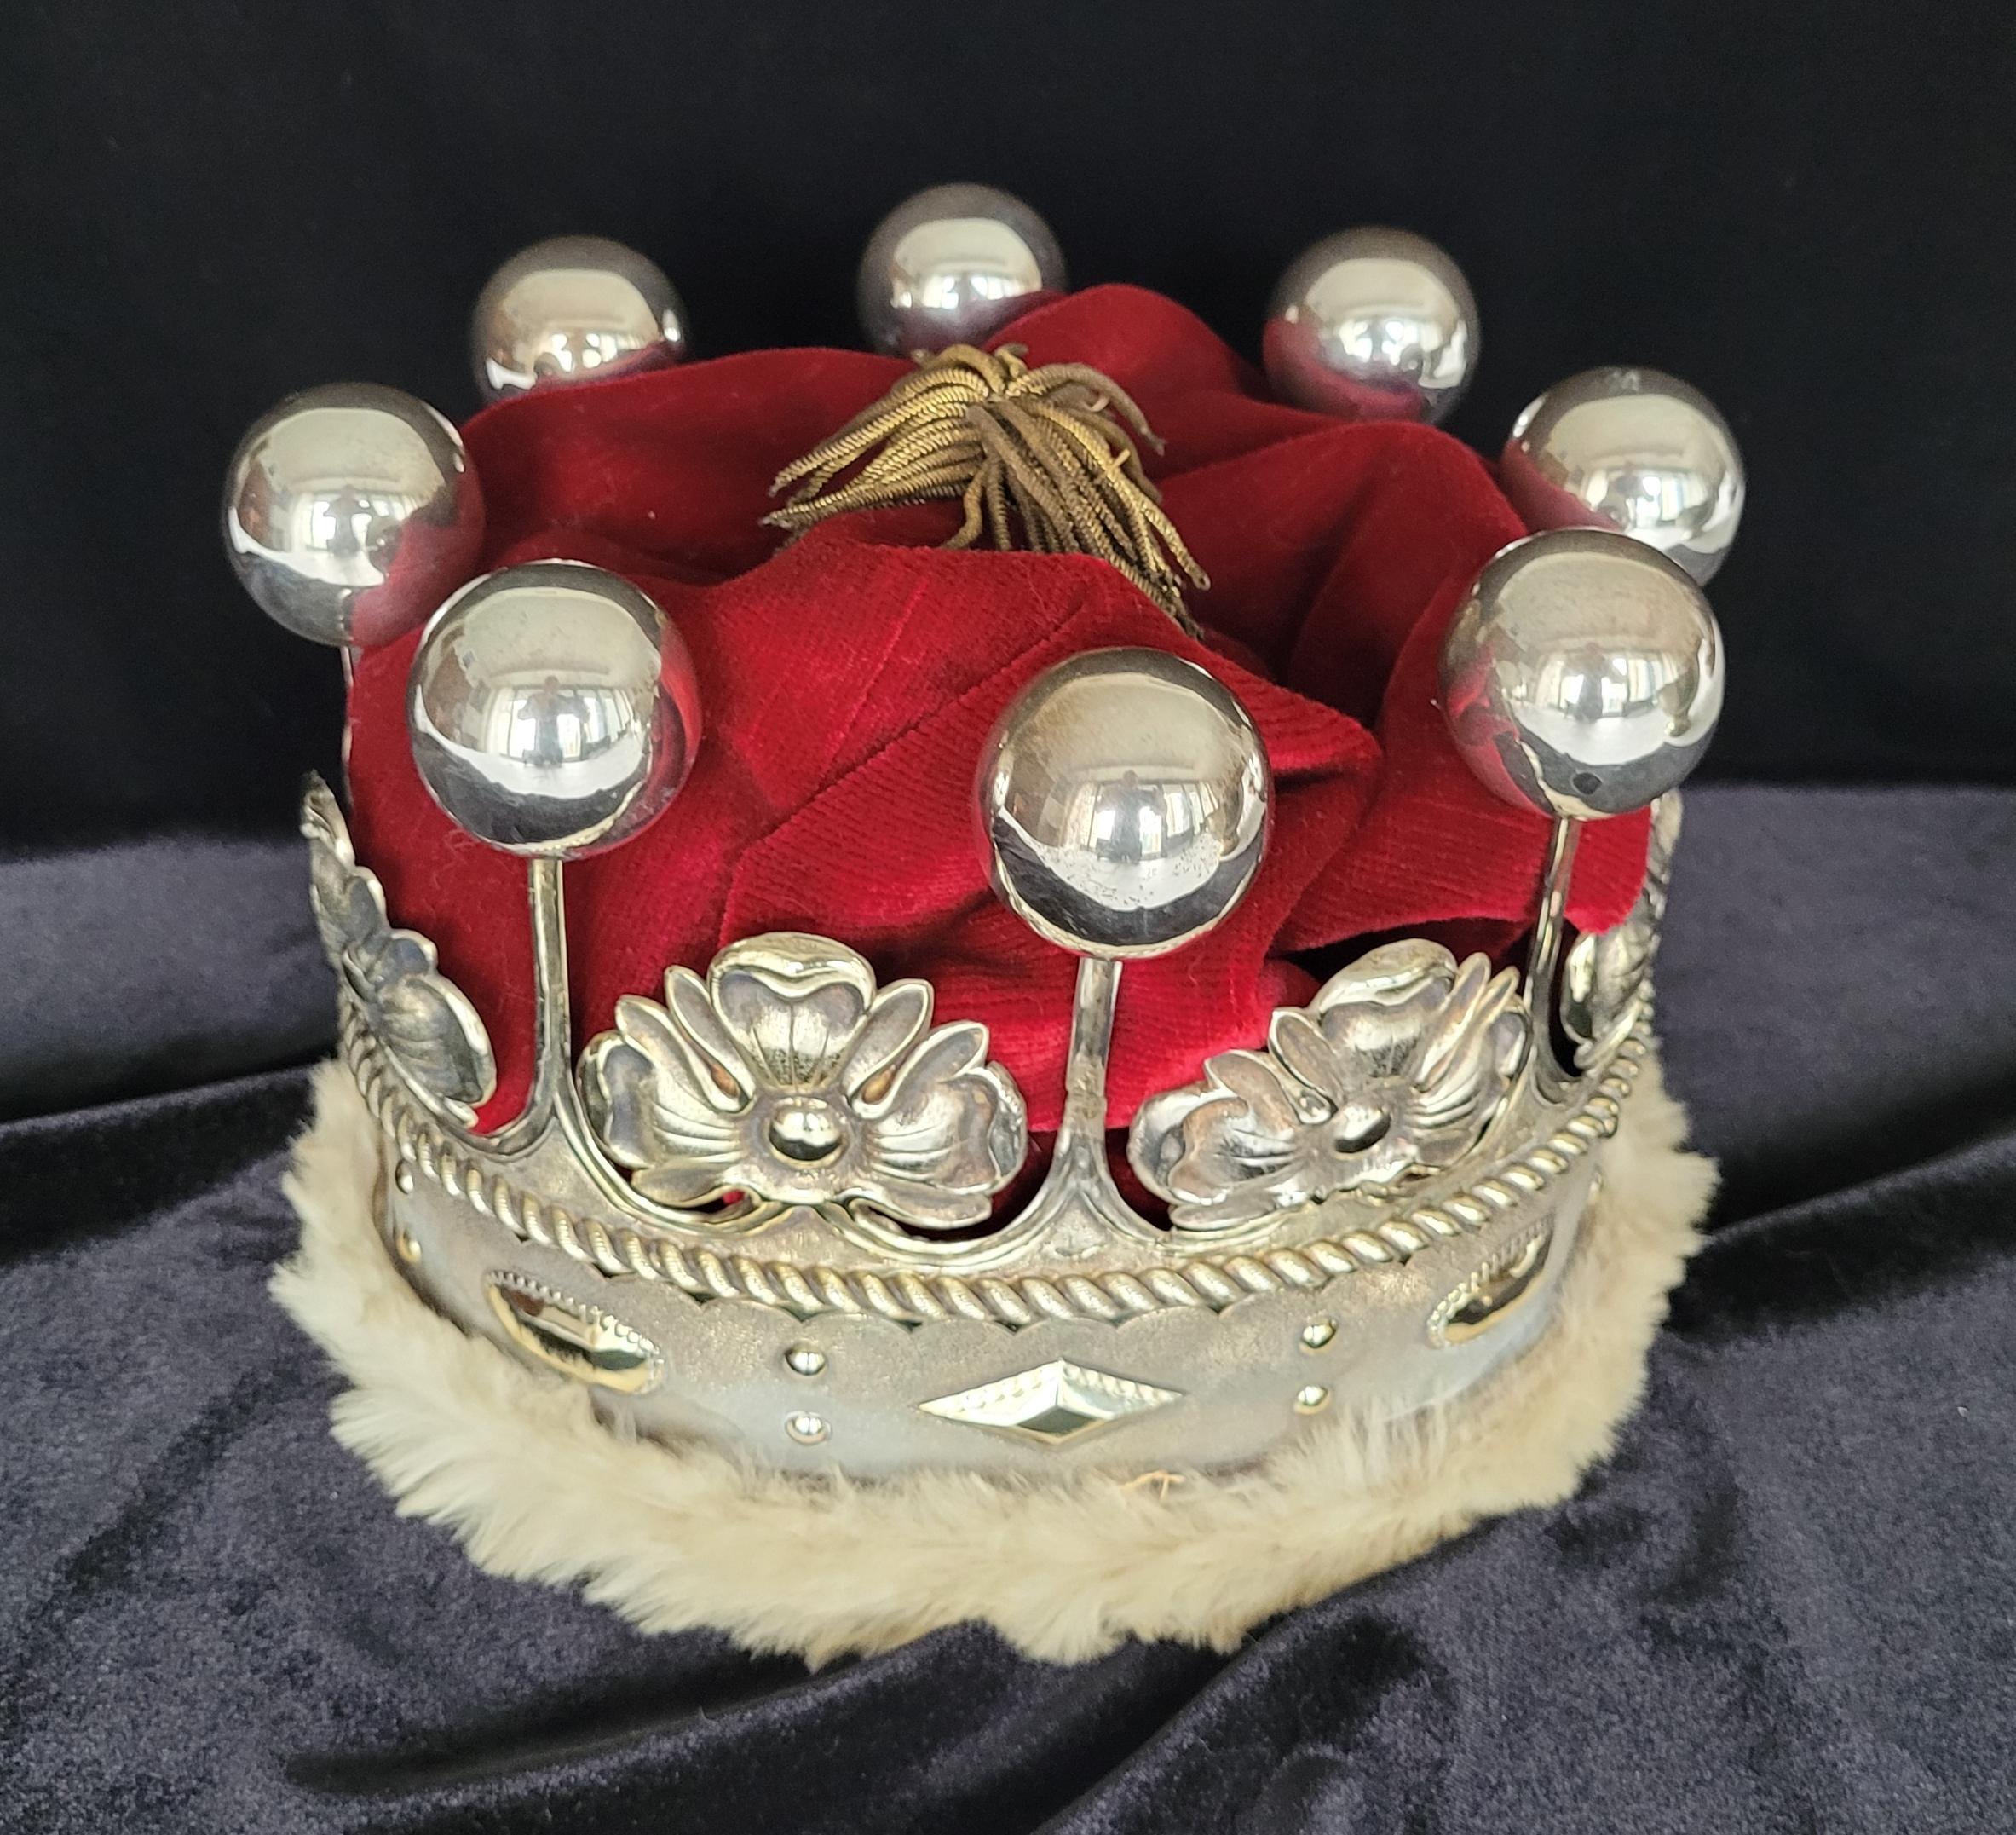 An Earl’s Coronet, in silver-gilt, by Hunt & Roskell: the firm formerly known as Storr & Mortimer, a direct line to Paul Storr. Made in 1911, no doubt for the Coronation of George V and Queen Mary. Although an opus number is stamped on the rim, the